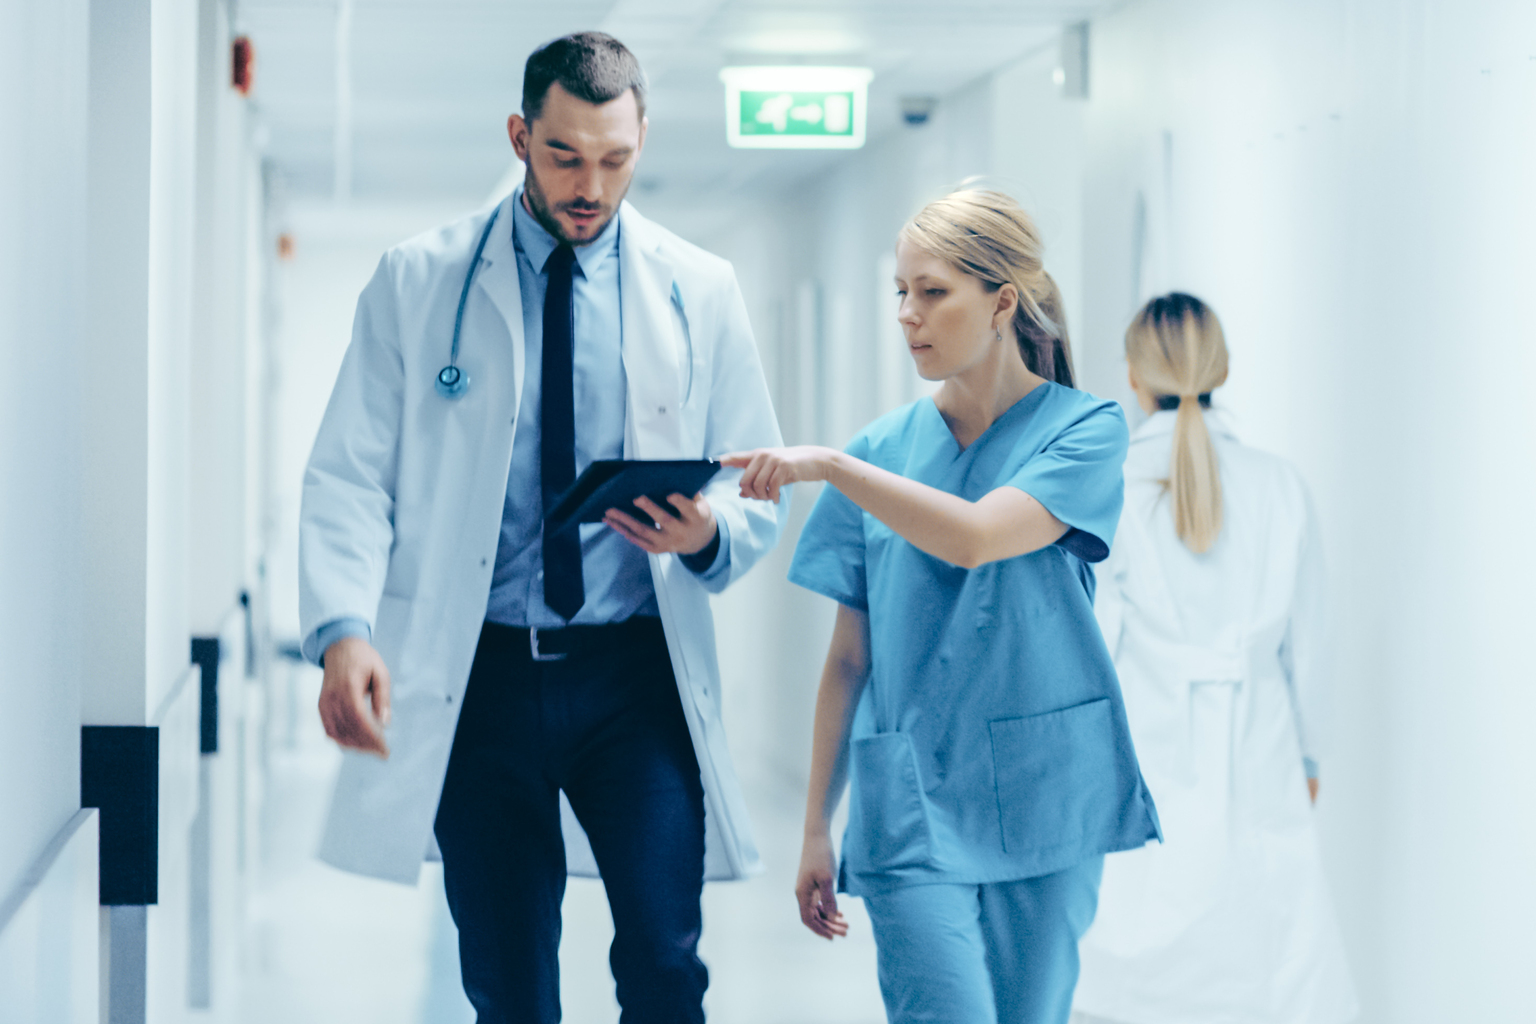 Empowering physicians with fast, accurate clinical answers